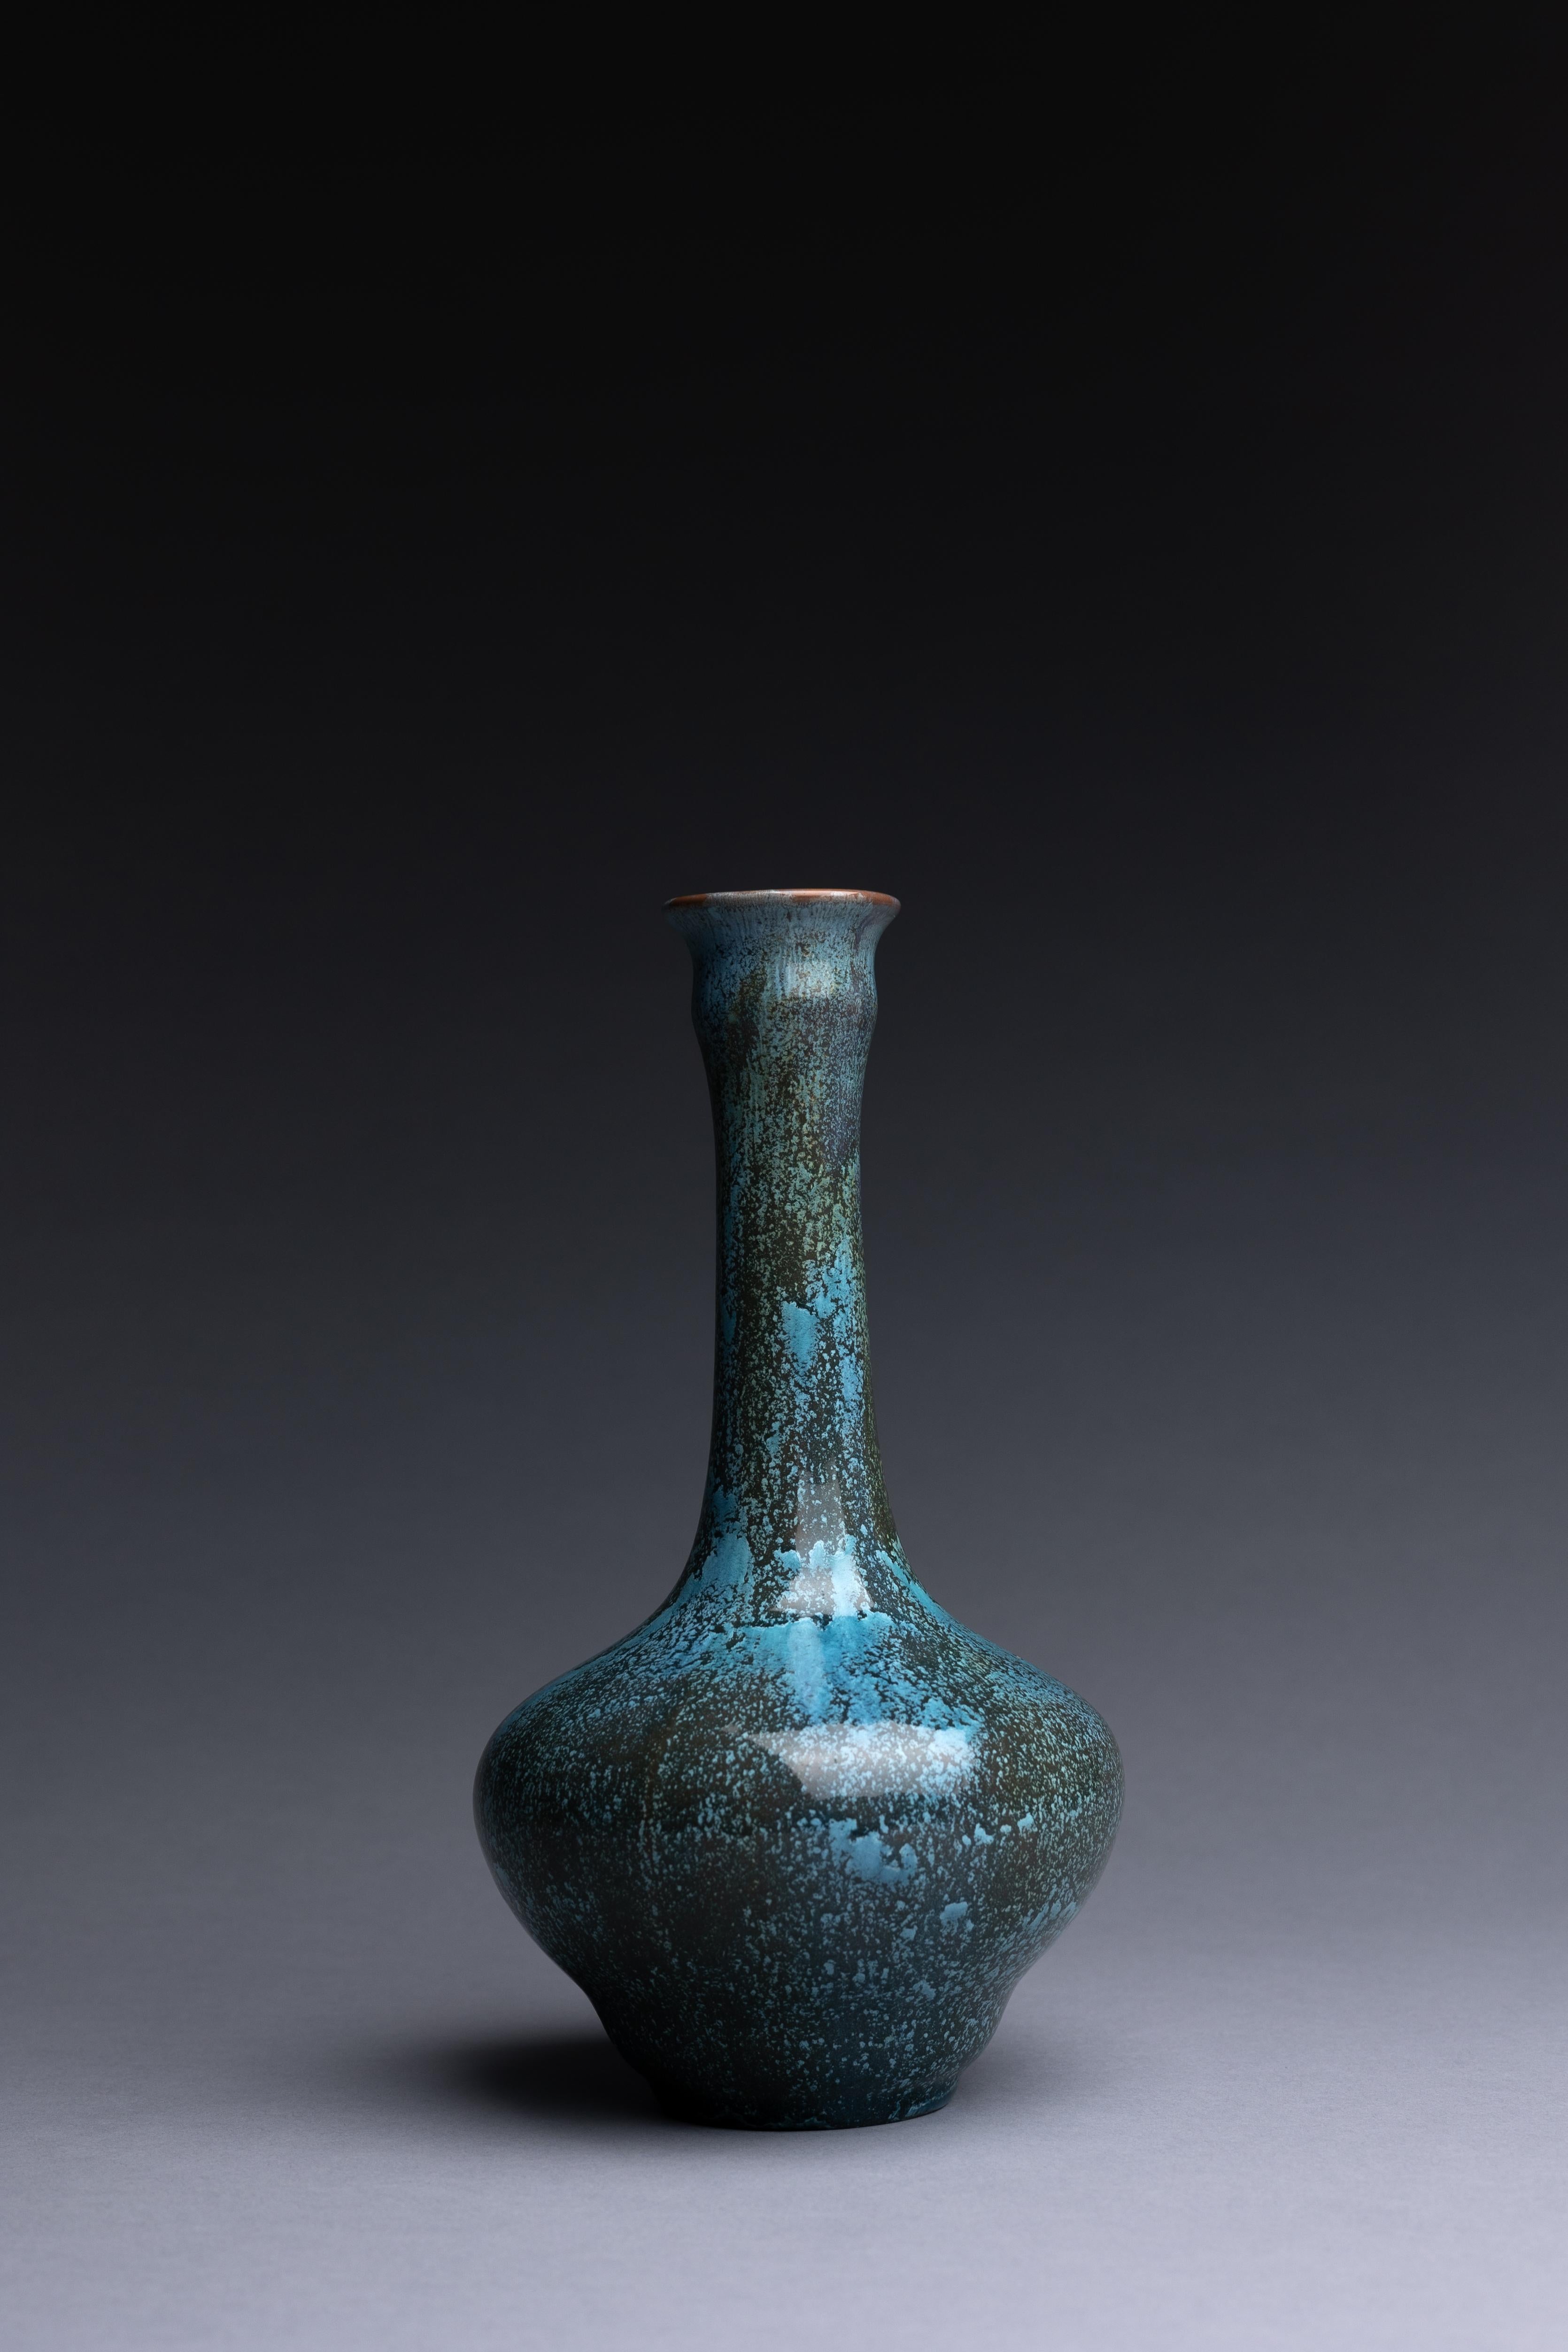 An art pottery vase made by Pilkingtons with a blue crystalline glaze, created circa 1910. This vase is a fine example of Pilkington’s studio art pottery.

Pilkington’s monochrome-glazed art pottery celebrates the company’s innovations in artistic